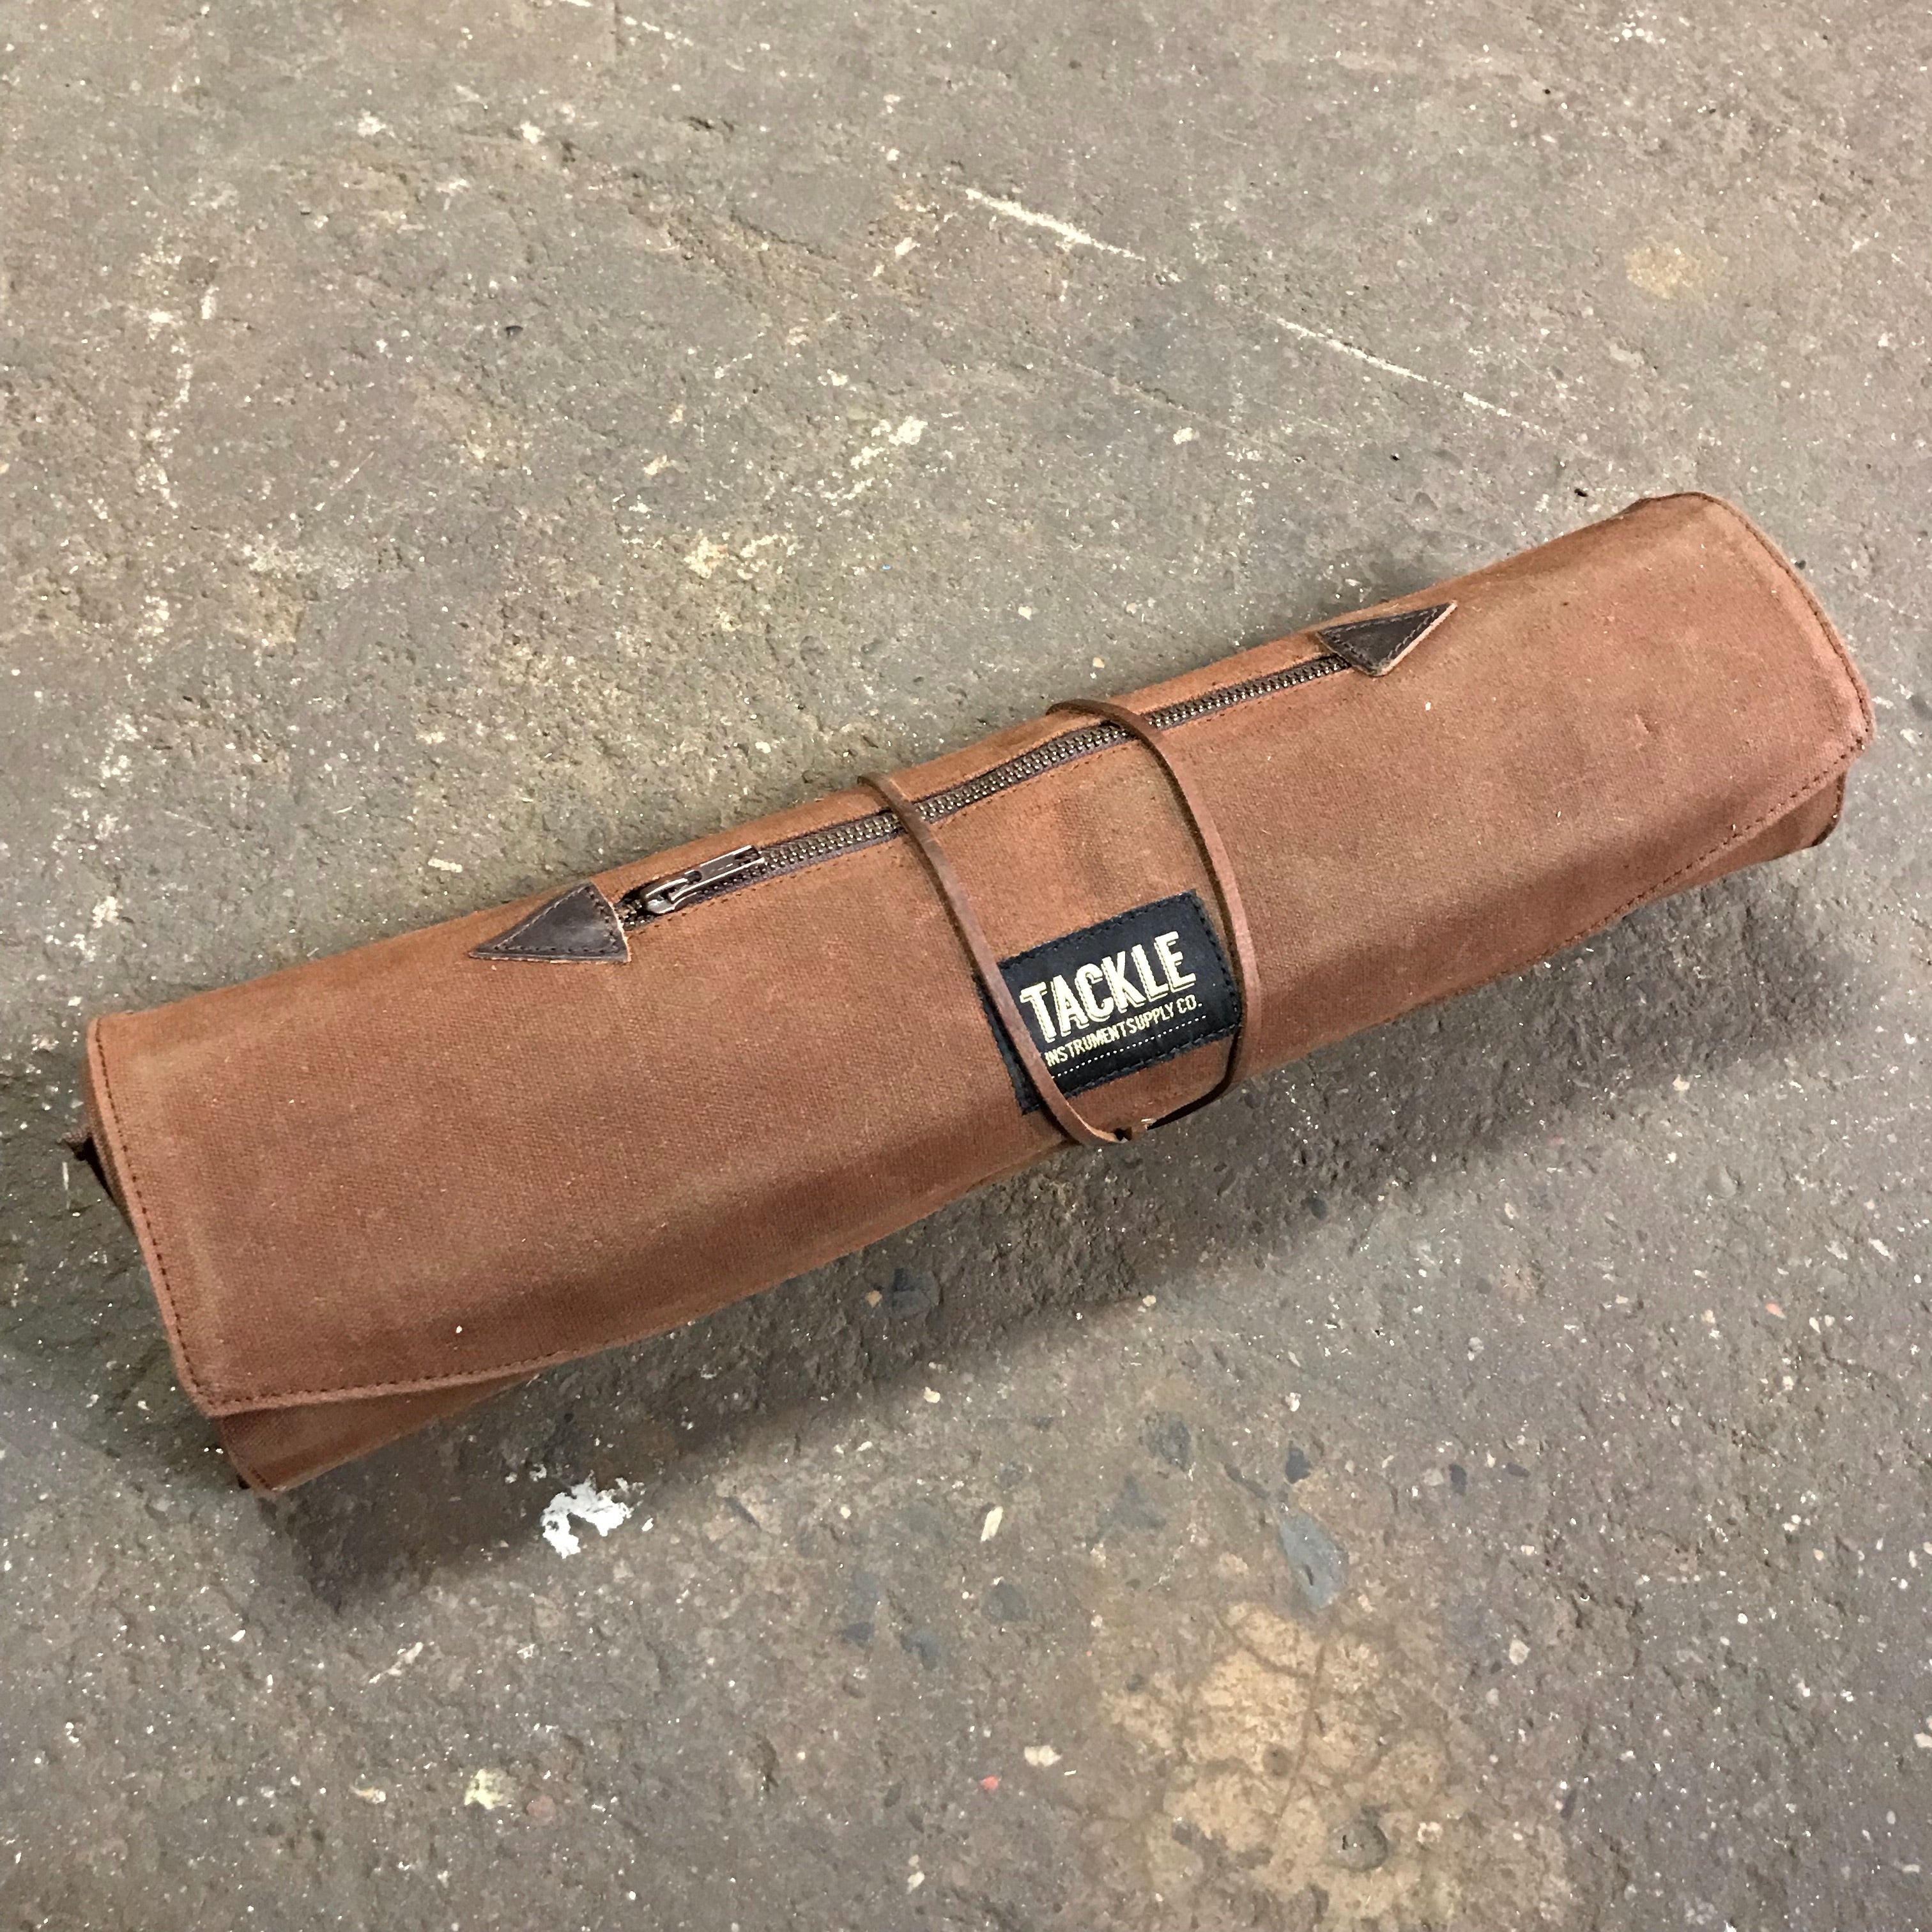 Waxed Canvas Stick Roll-Up Bag – TACKLE Instrument Supply Co.